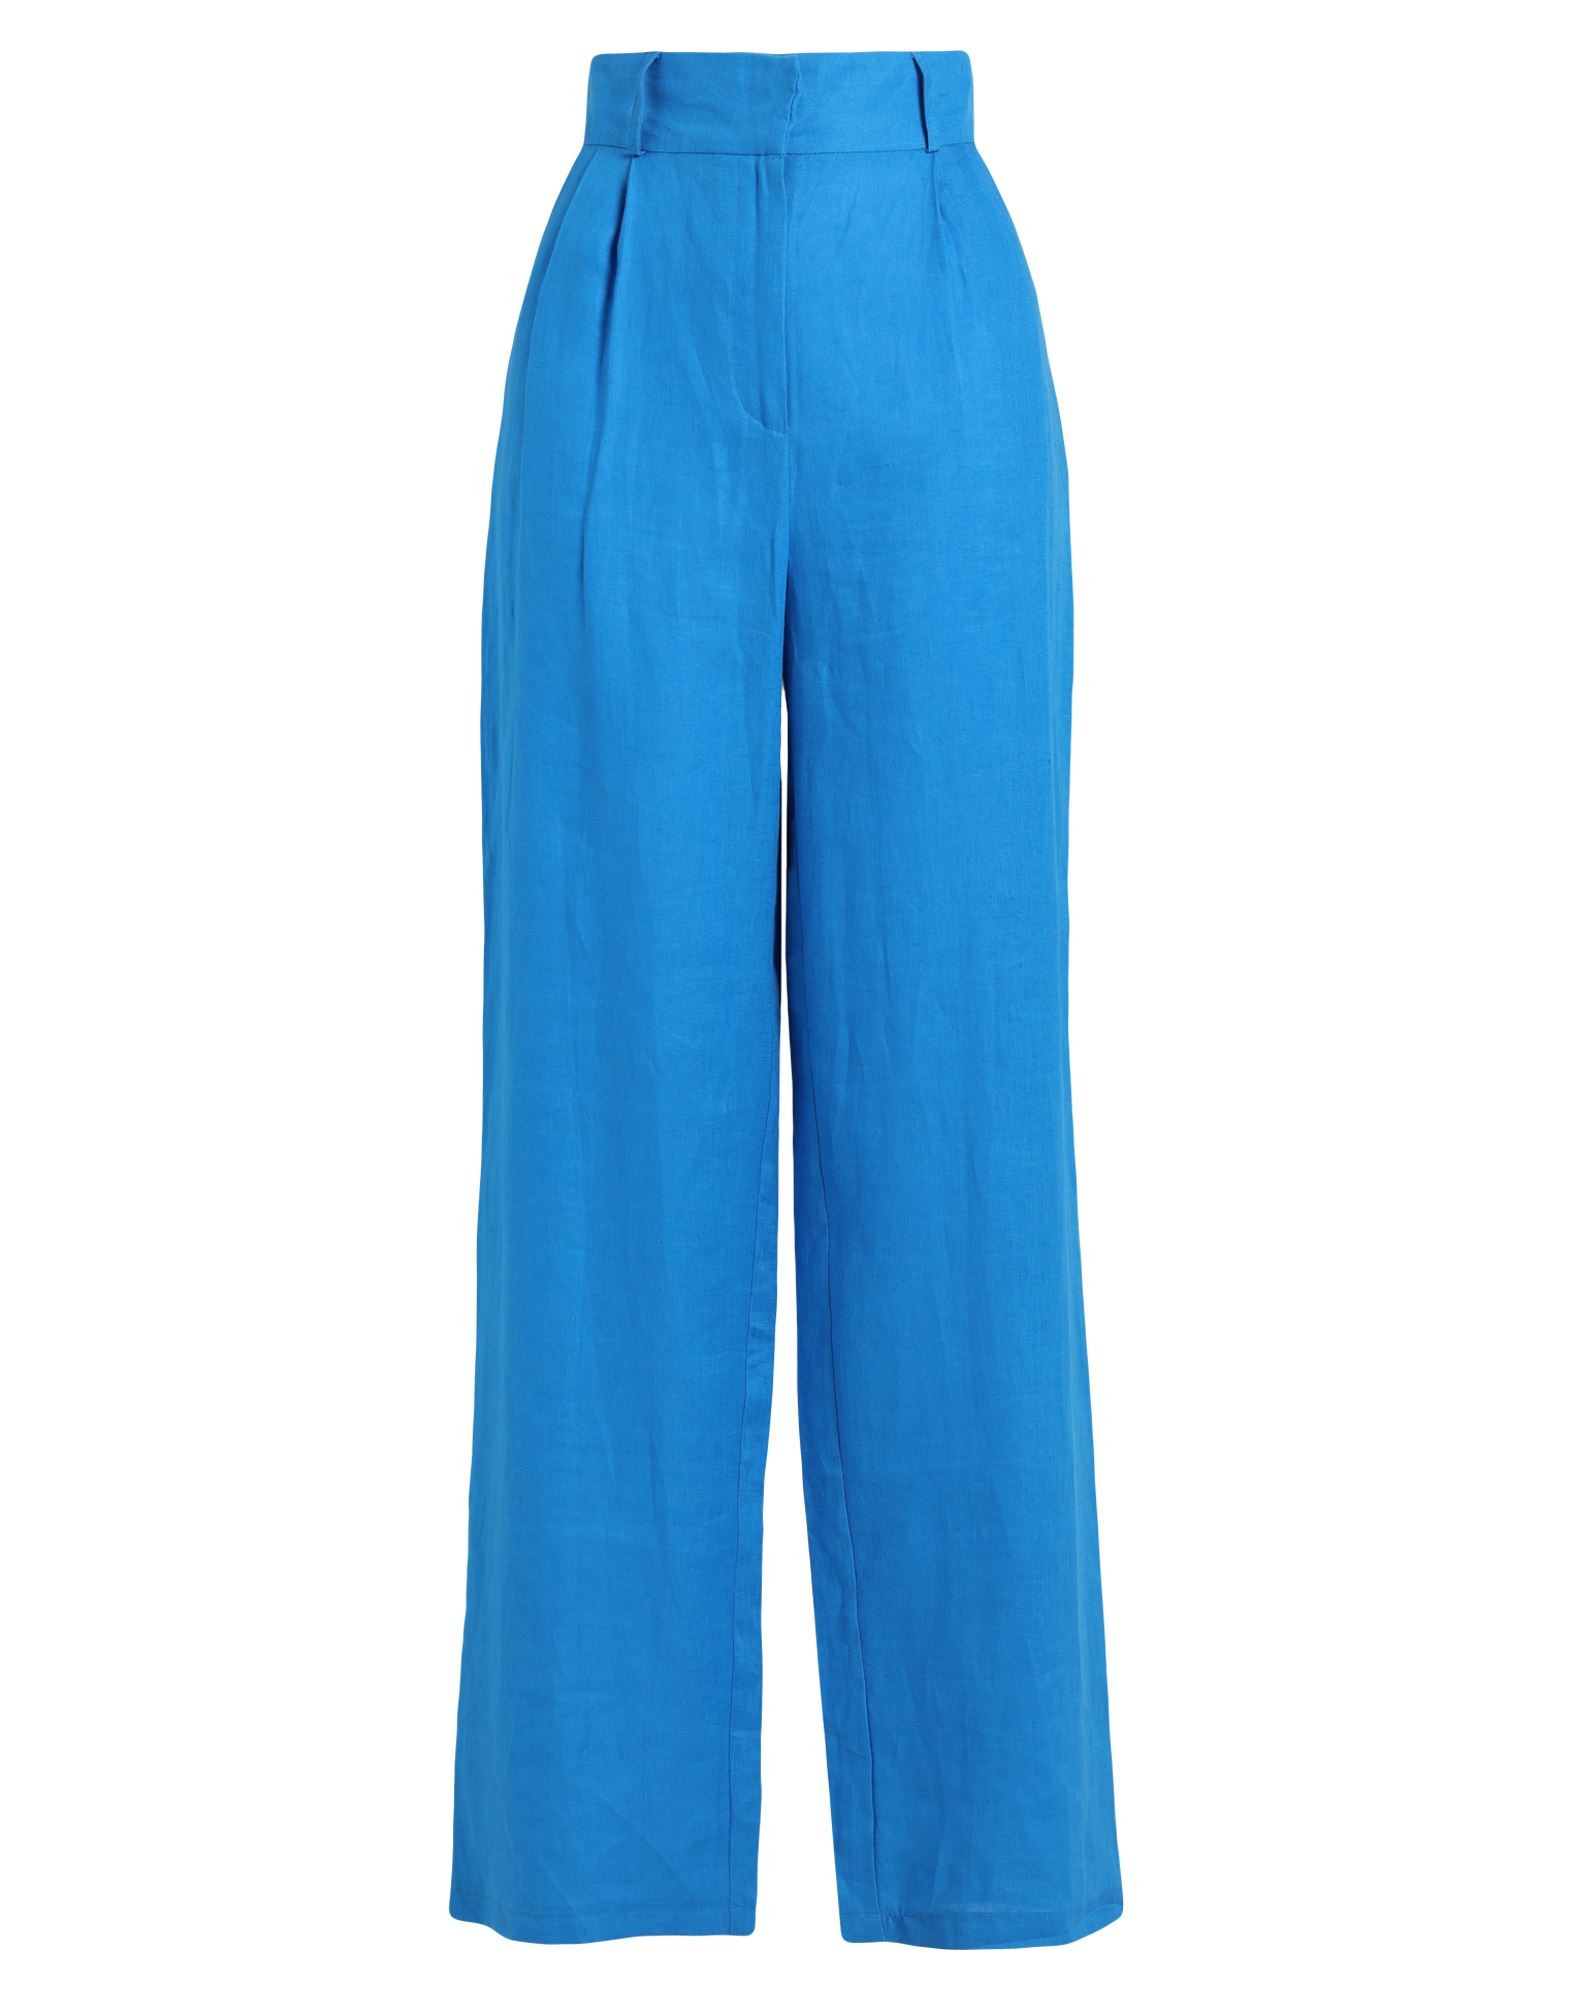 Actualee Pants In Blue